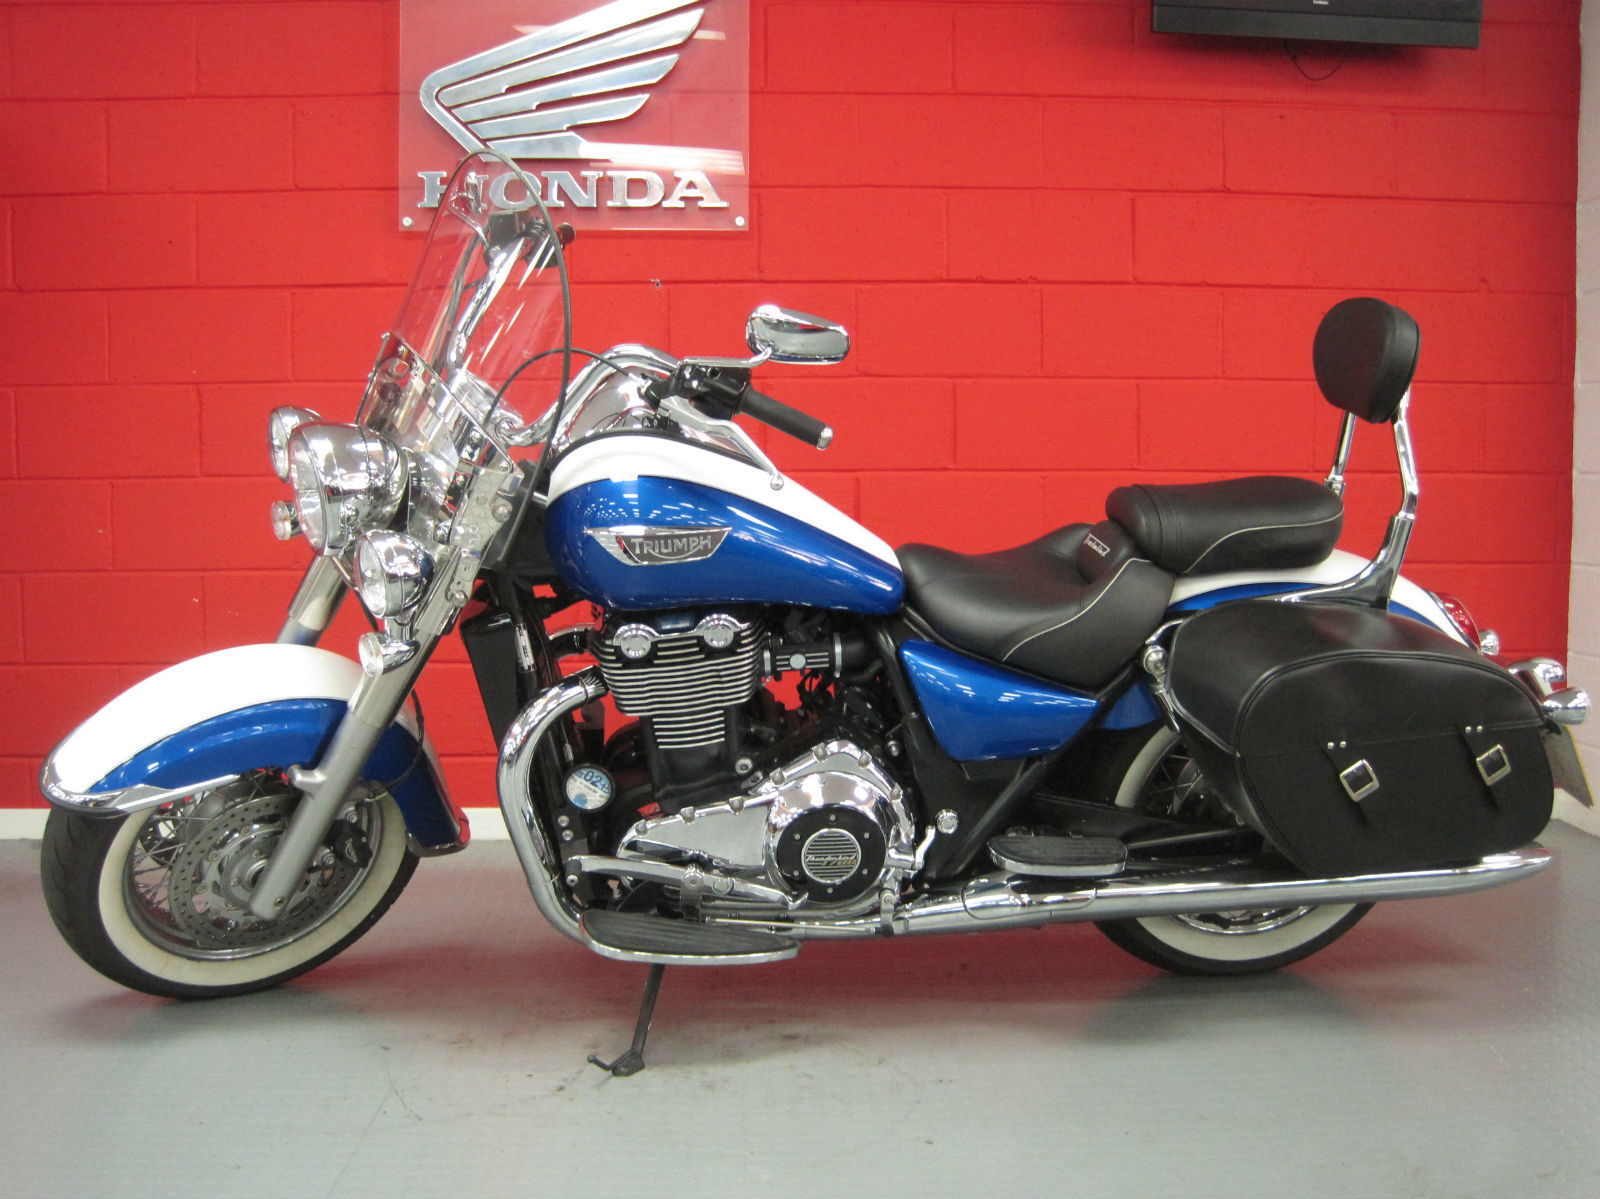 Used 2015 Triumph Thunderbird LT ABS Motorcycles in 